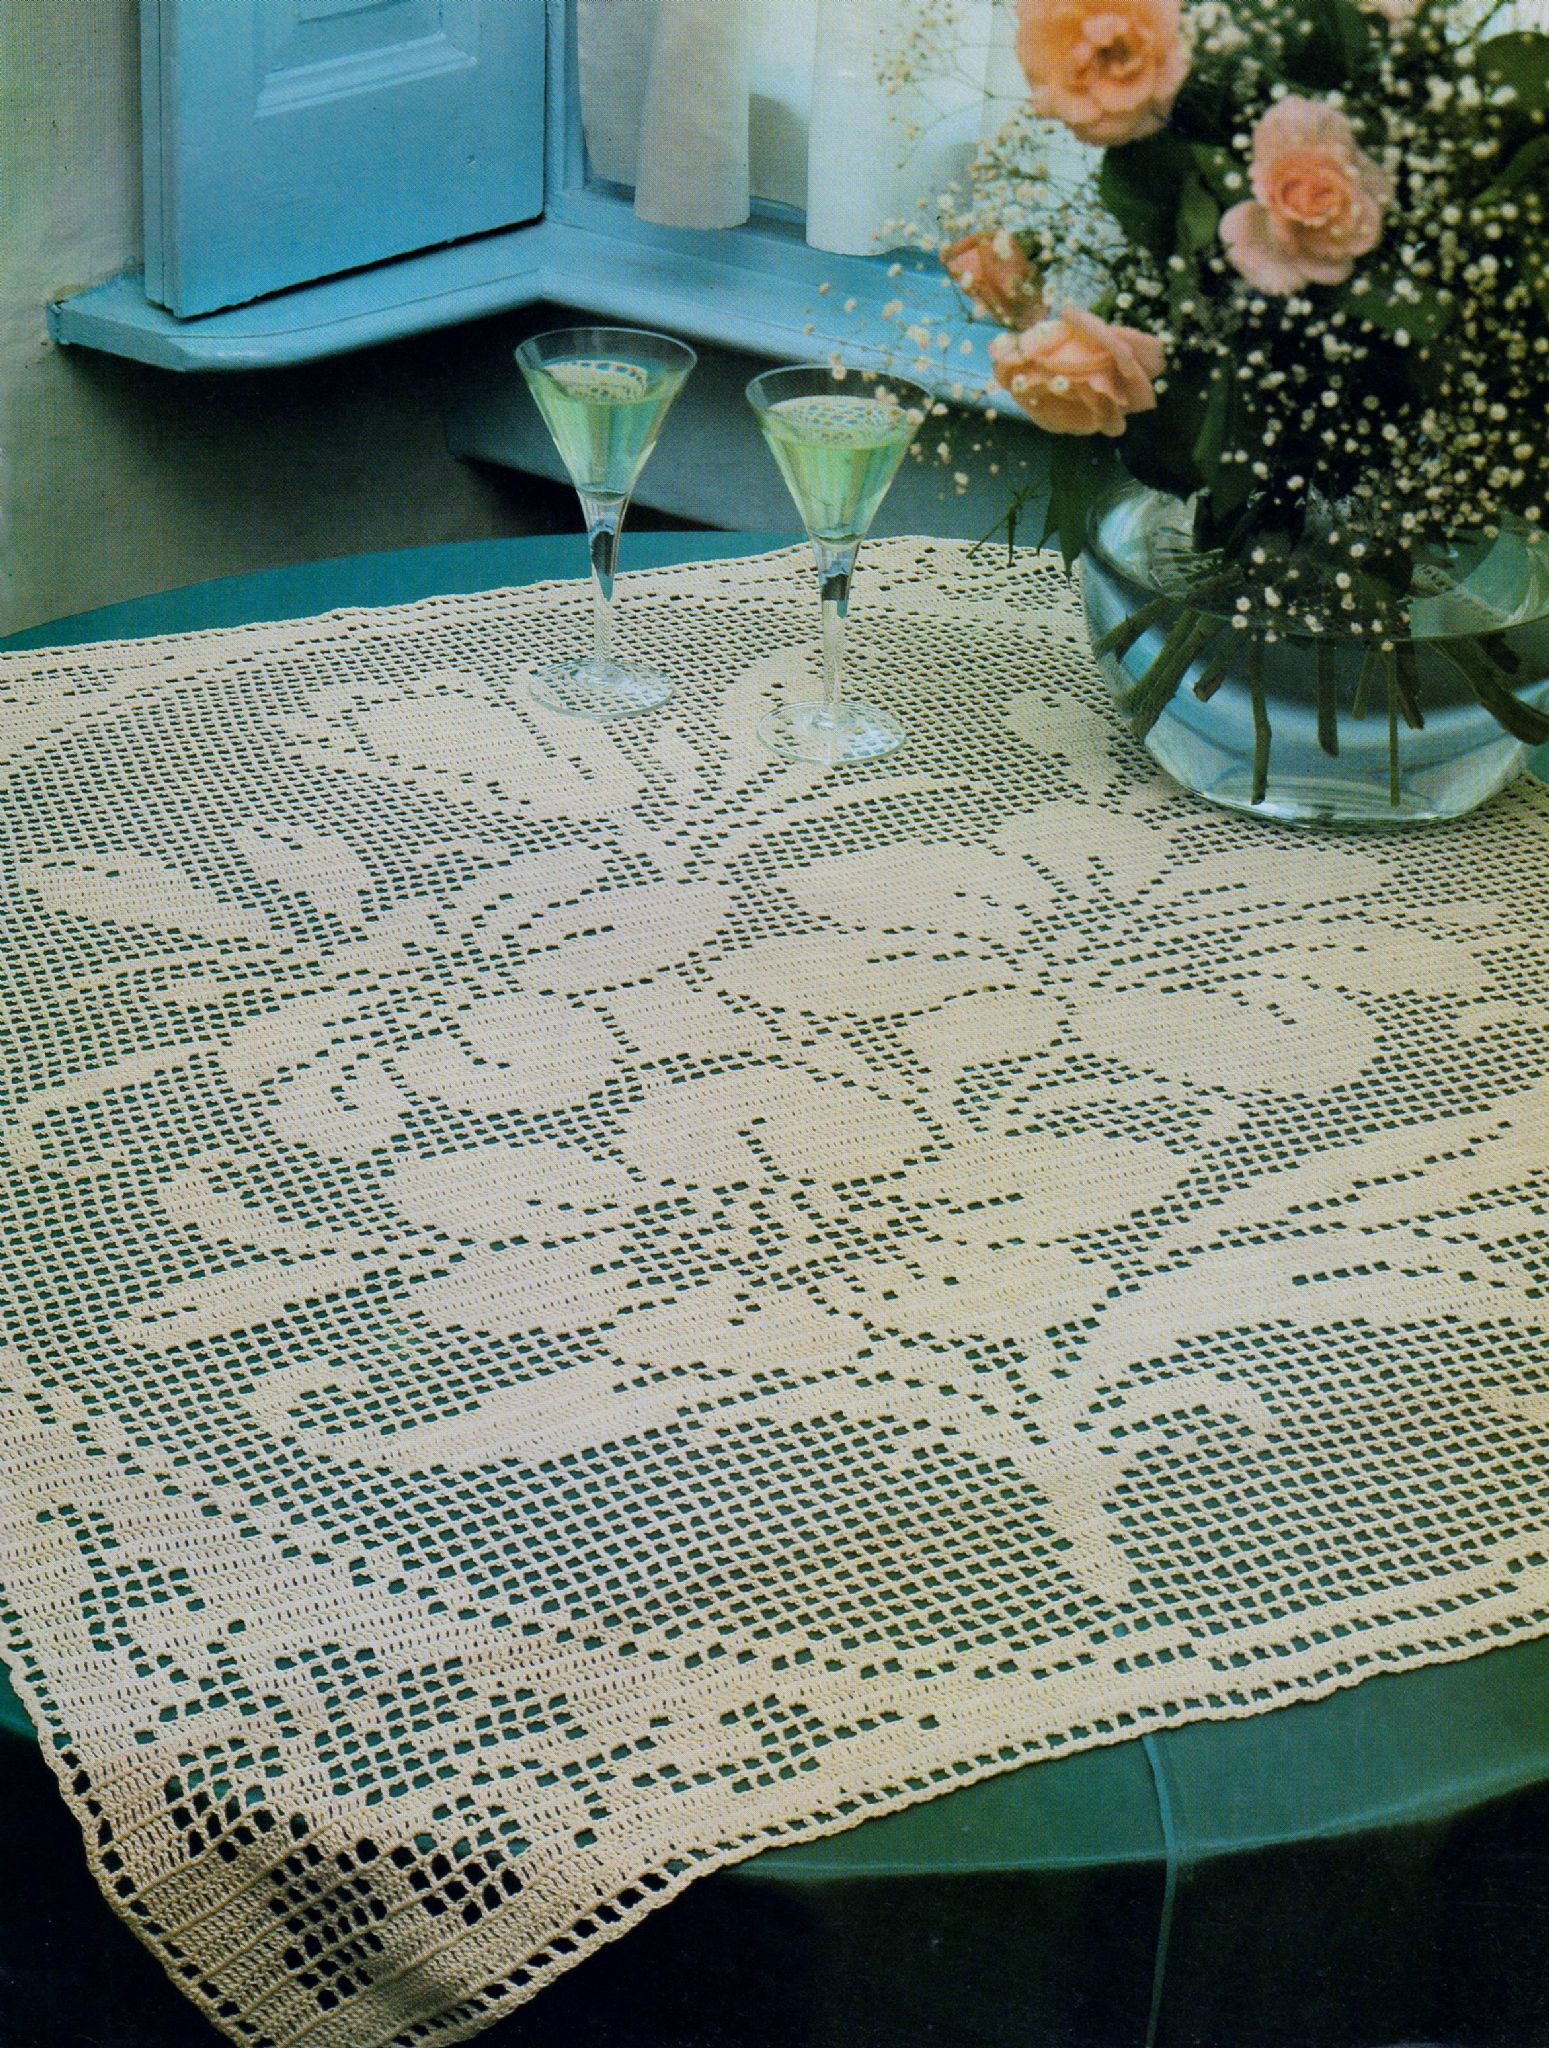 Knitting Patterns For Tablecloths Pdf Digital Download Vintage Crochet Pattern To Make A Filet Lace Floral Patterned Table Cloth And Curtain 33 X 36